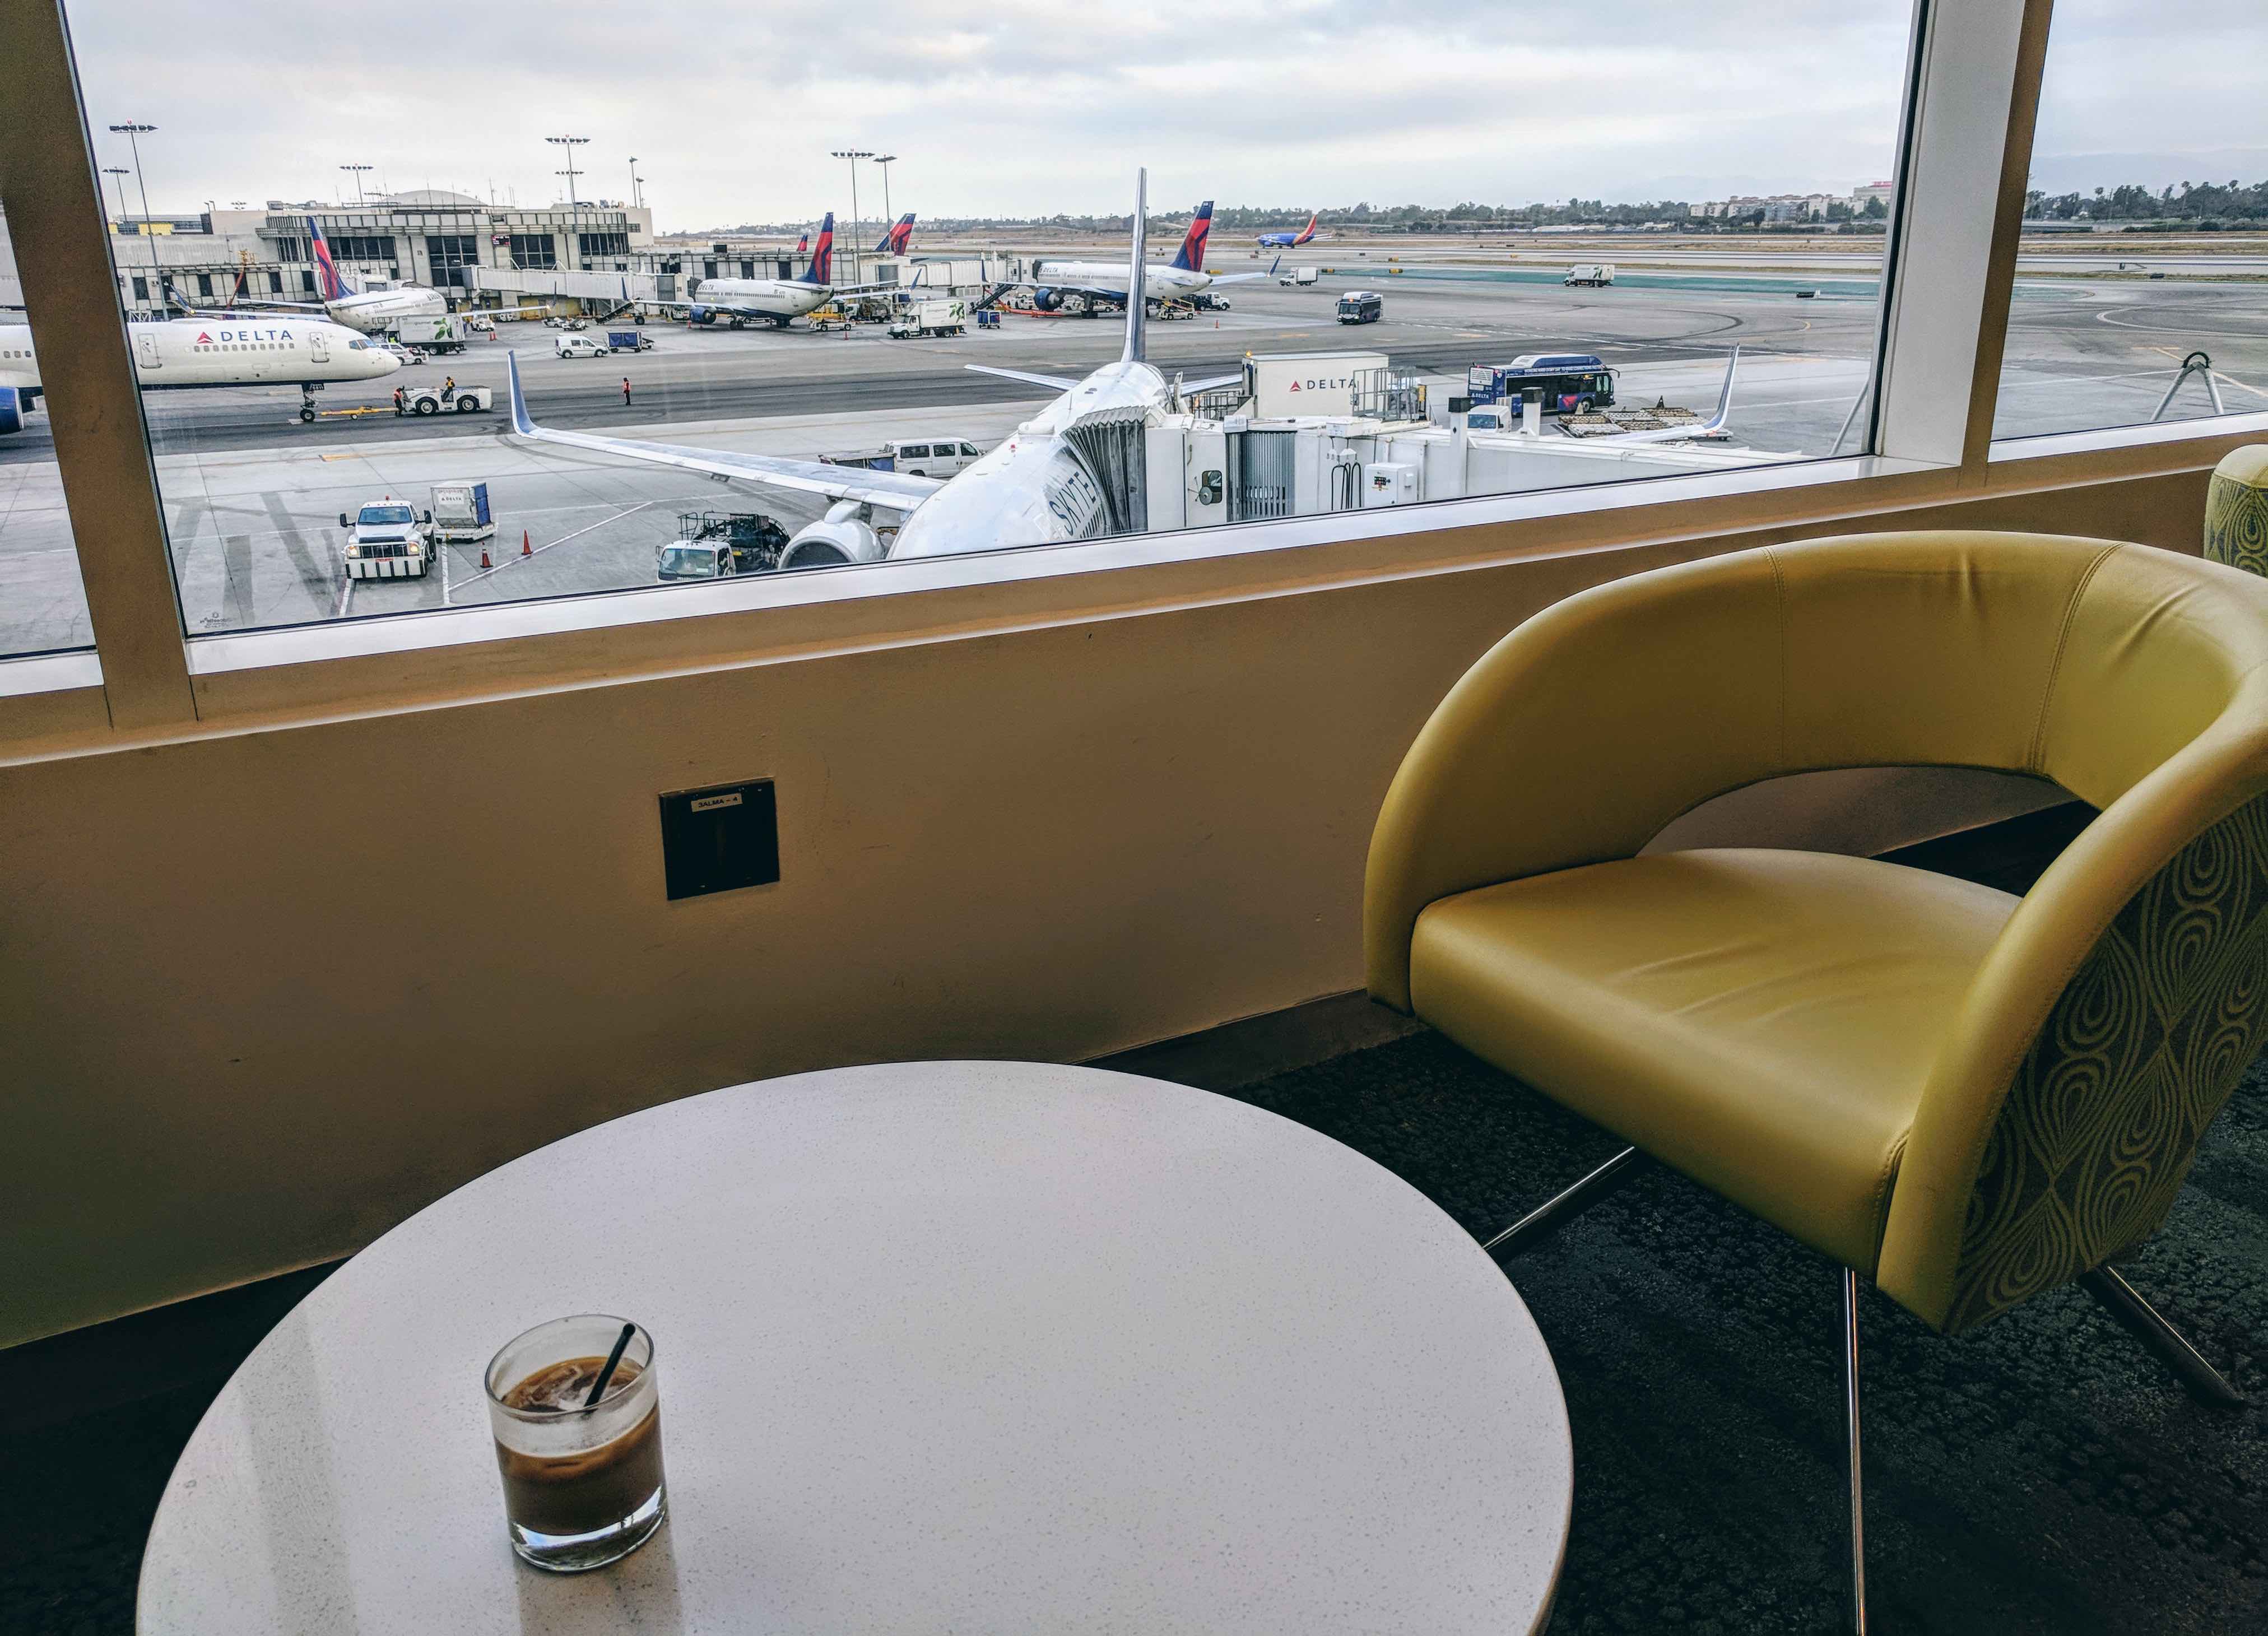 The complete guide to Delta Sky Club lounges in 2023